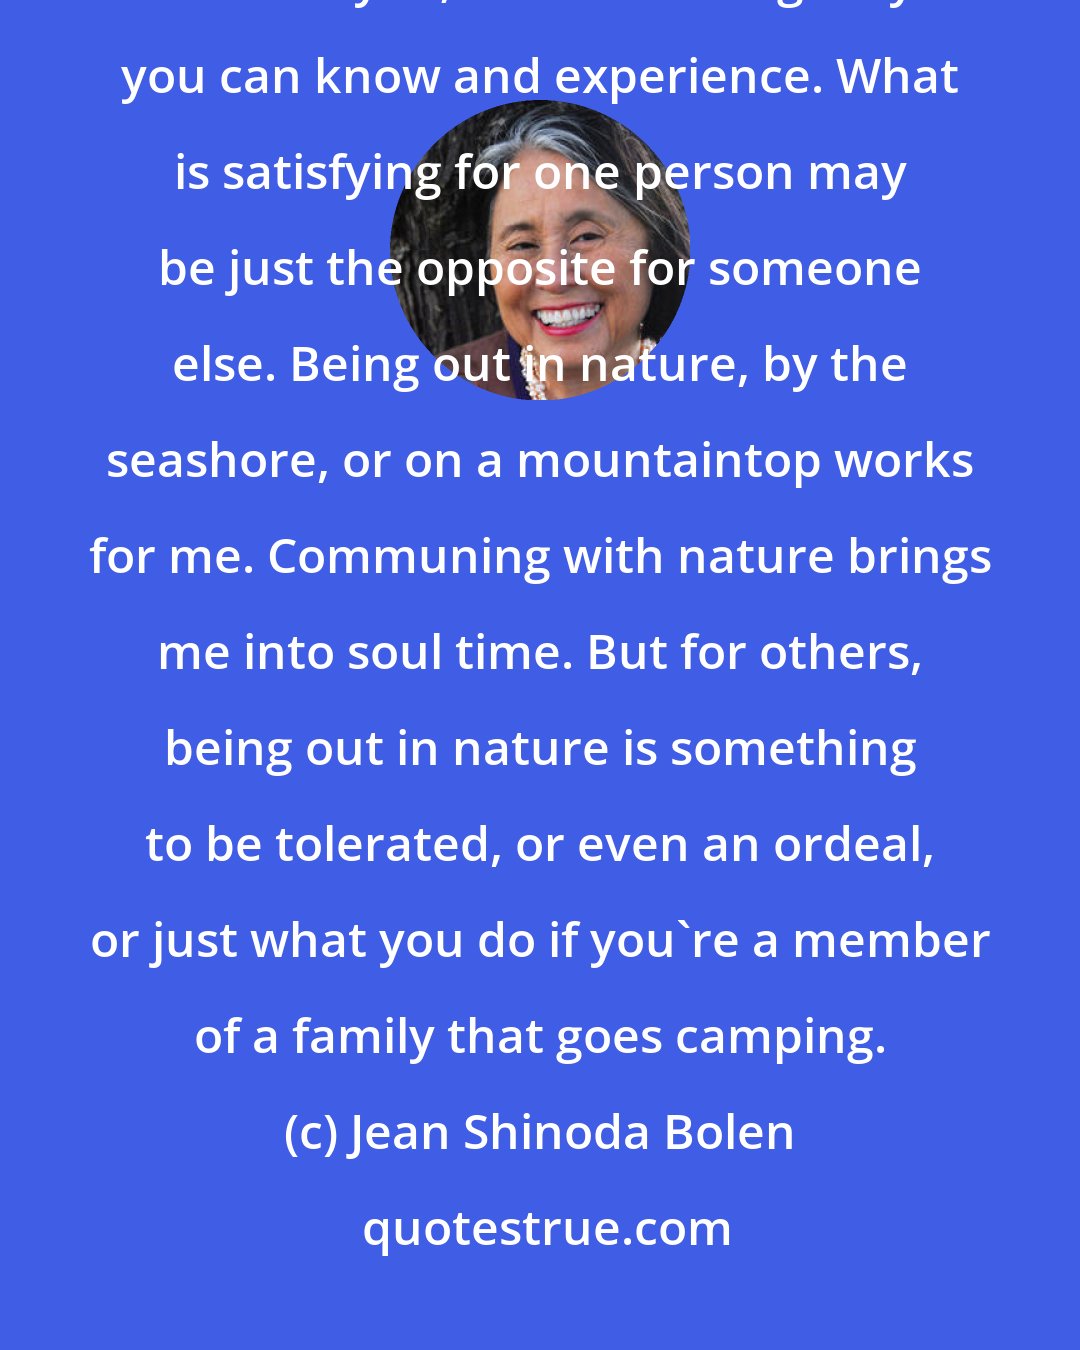 Jean Shinoda Bolen: What particular experiences will nourish your soul? No one can prescribe that for you; it is something only you can know and experience. What is satisfying for one person may be just the opposite for someone else. Being out in nature, by the seashore, or on a mountaintop works for me. Communing with nature brings me into soul time. But for others, being out in nature is something to be tolerated, or even an ordeal, or just what you do if you're a member of a family that goes camping.